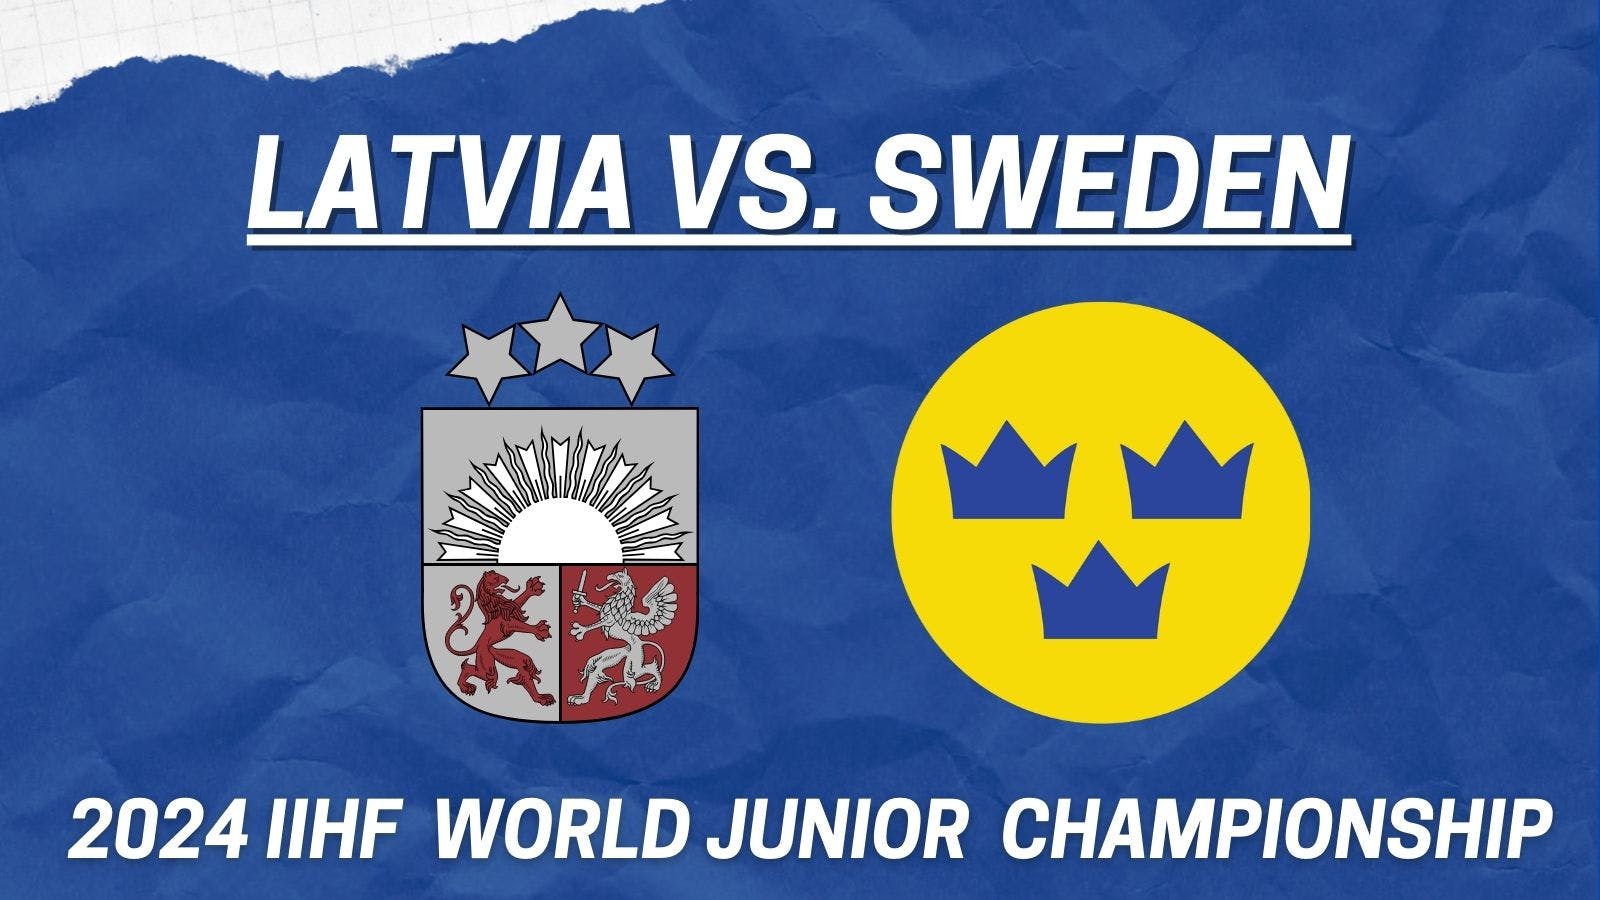 Top standouts from Sweden vs. Latvia game at 2024 World Junior Championship